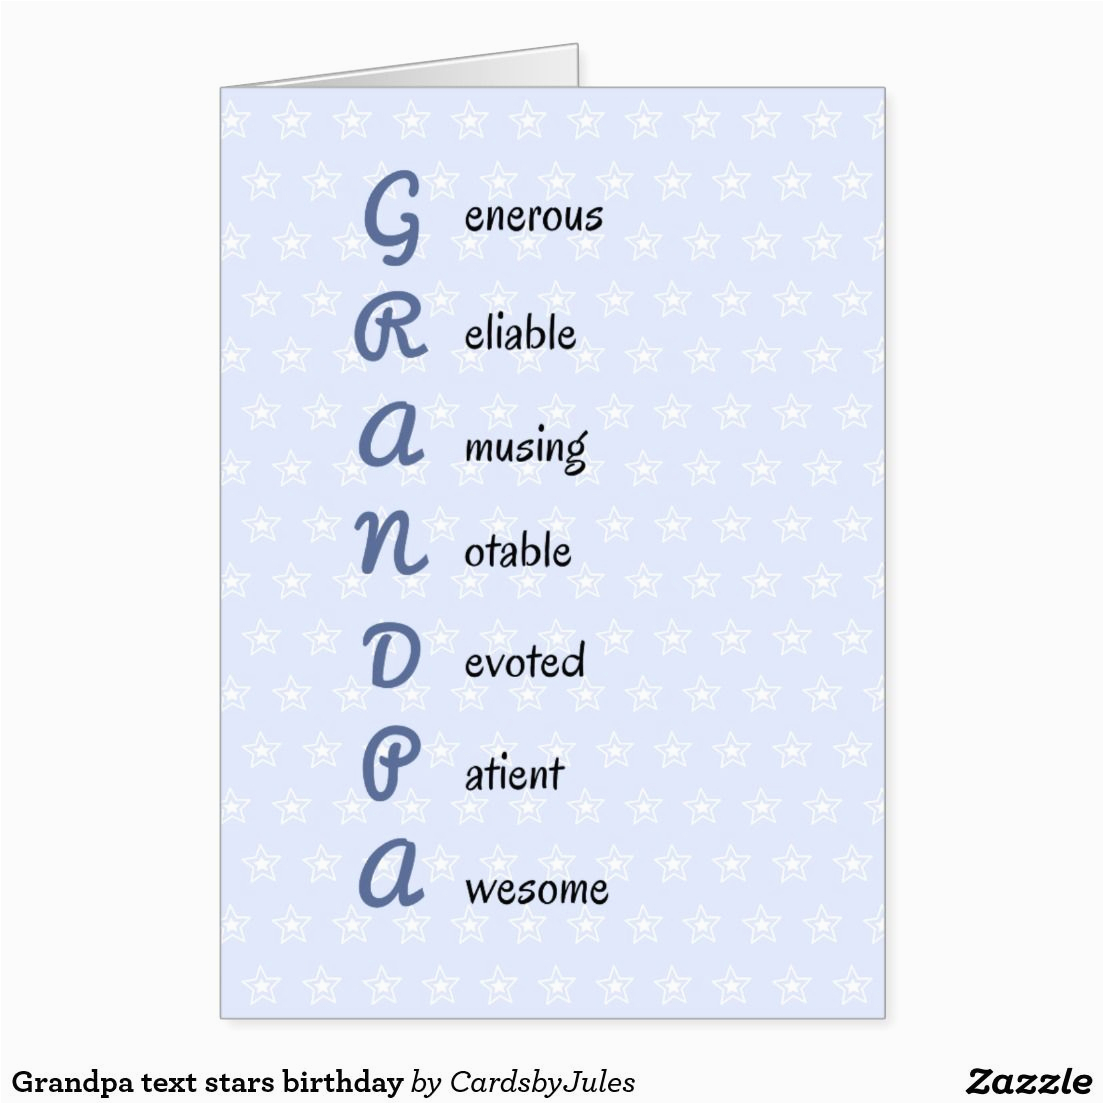 Ideas For Birthday Cards For Grandpa 96 Funny Birthday Cards For Grandpa Funny Birthday Cards For